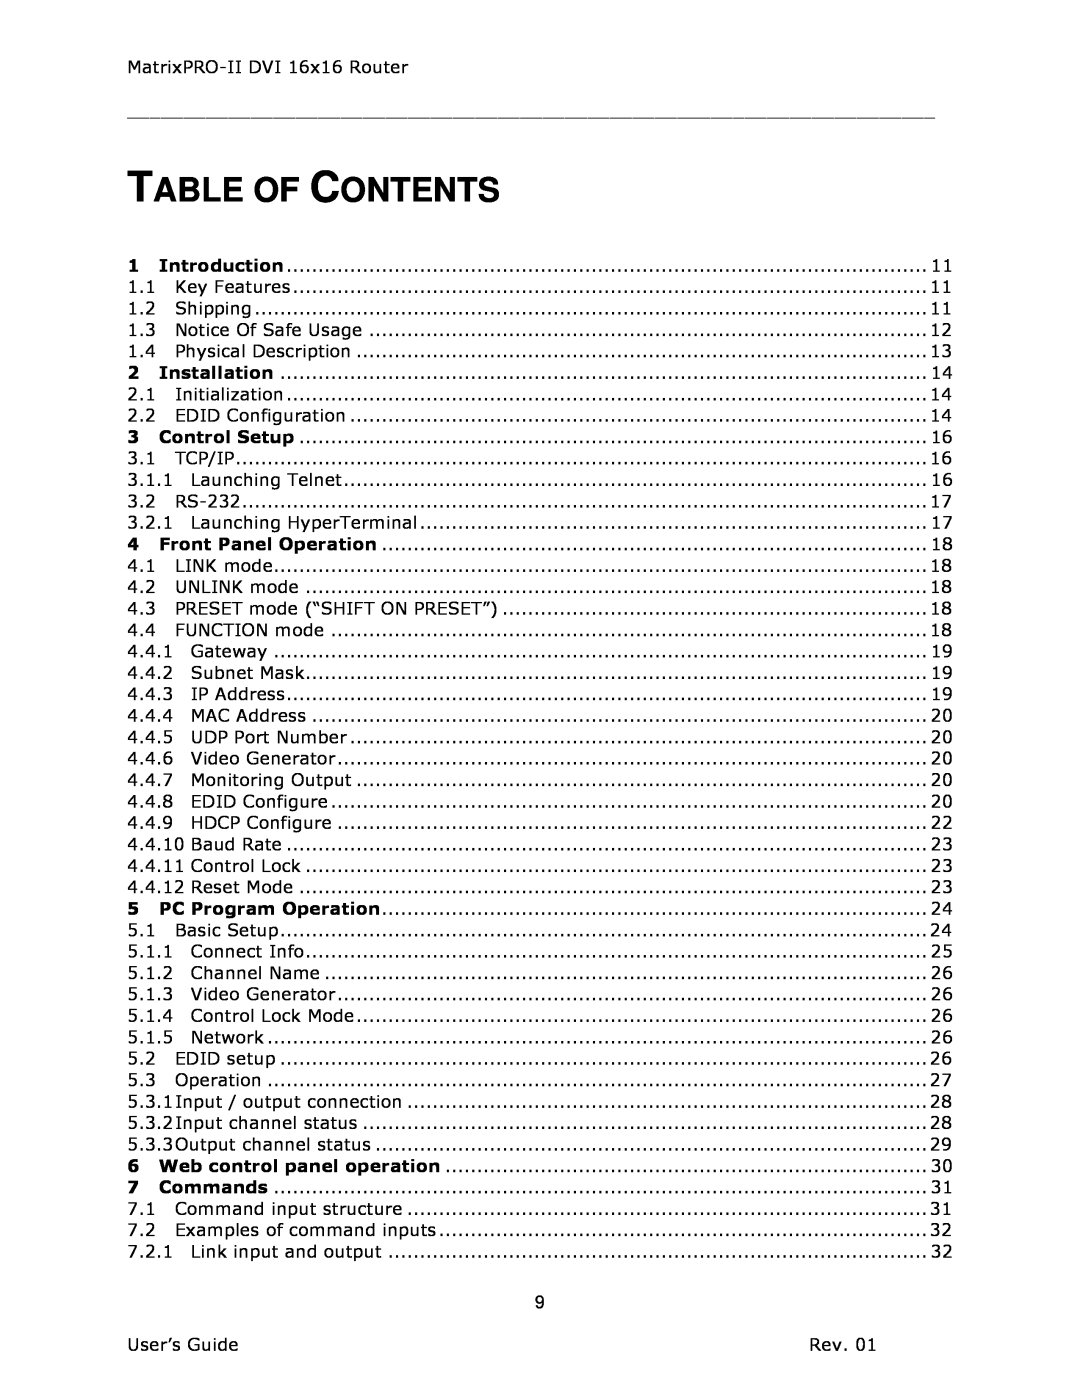 Barco 26-1302001-00 manual Table Of Contents 